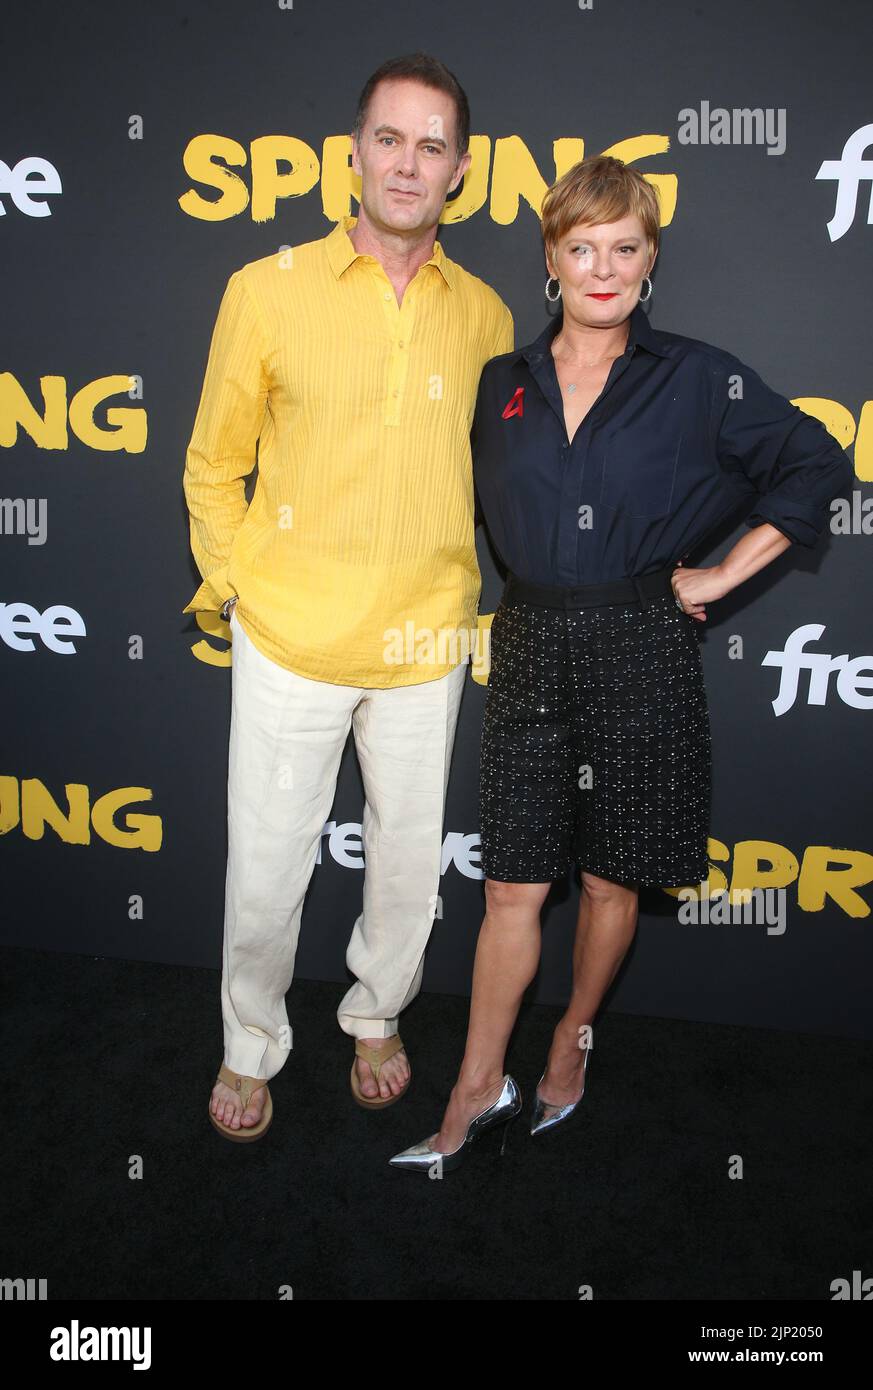 Los Angele, Ca. 14th Aug, 2022. Garret Dillahunt, Martha Plimpton at the red carpet premiere of Amazon Freevee's Sprung at the Hollywood Forever Cemetery in Los Angeles, California on August 14, 2022. Credit: Faye Sadou/Media Punch/Alamy Live News Stock Photo